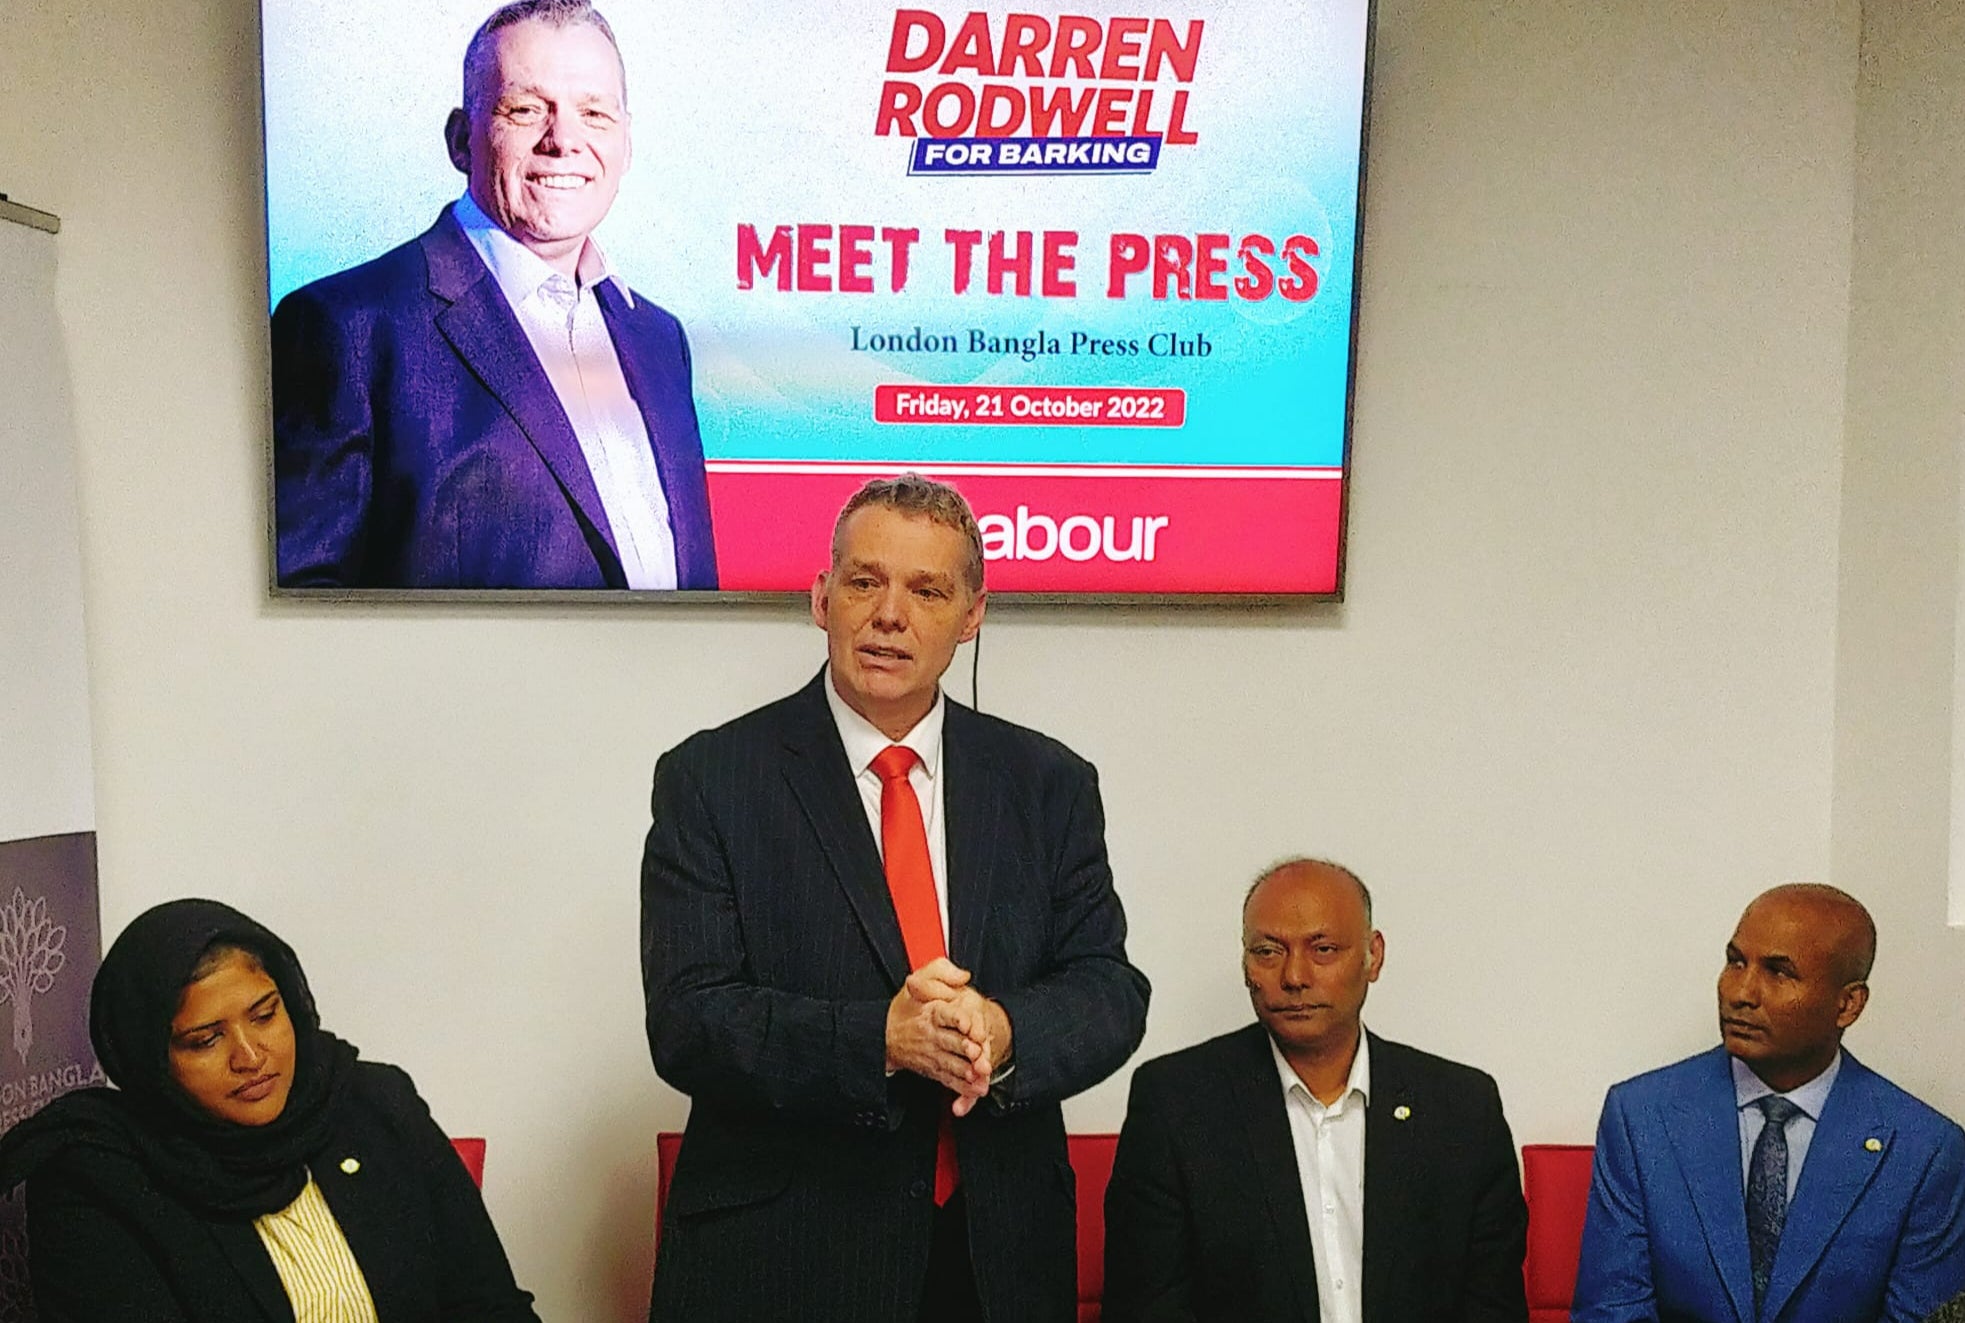 Darren Rodwell is the Labour candidate for Barking